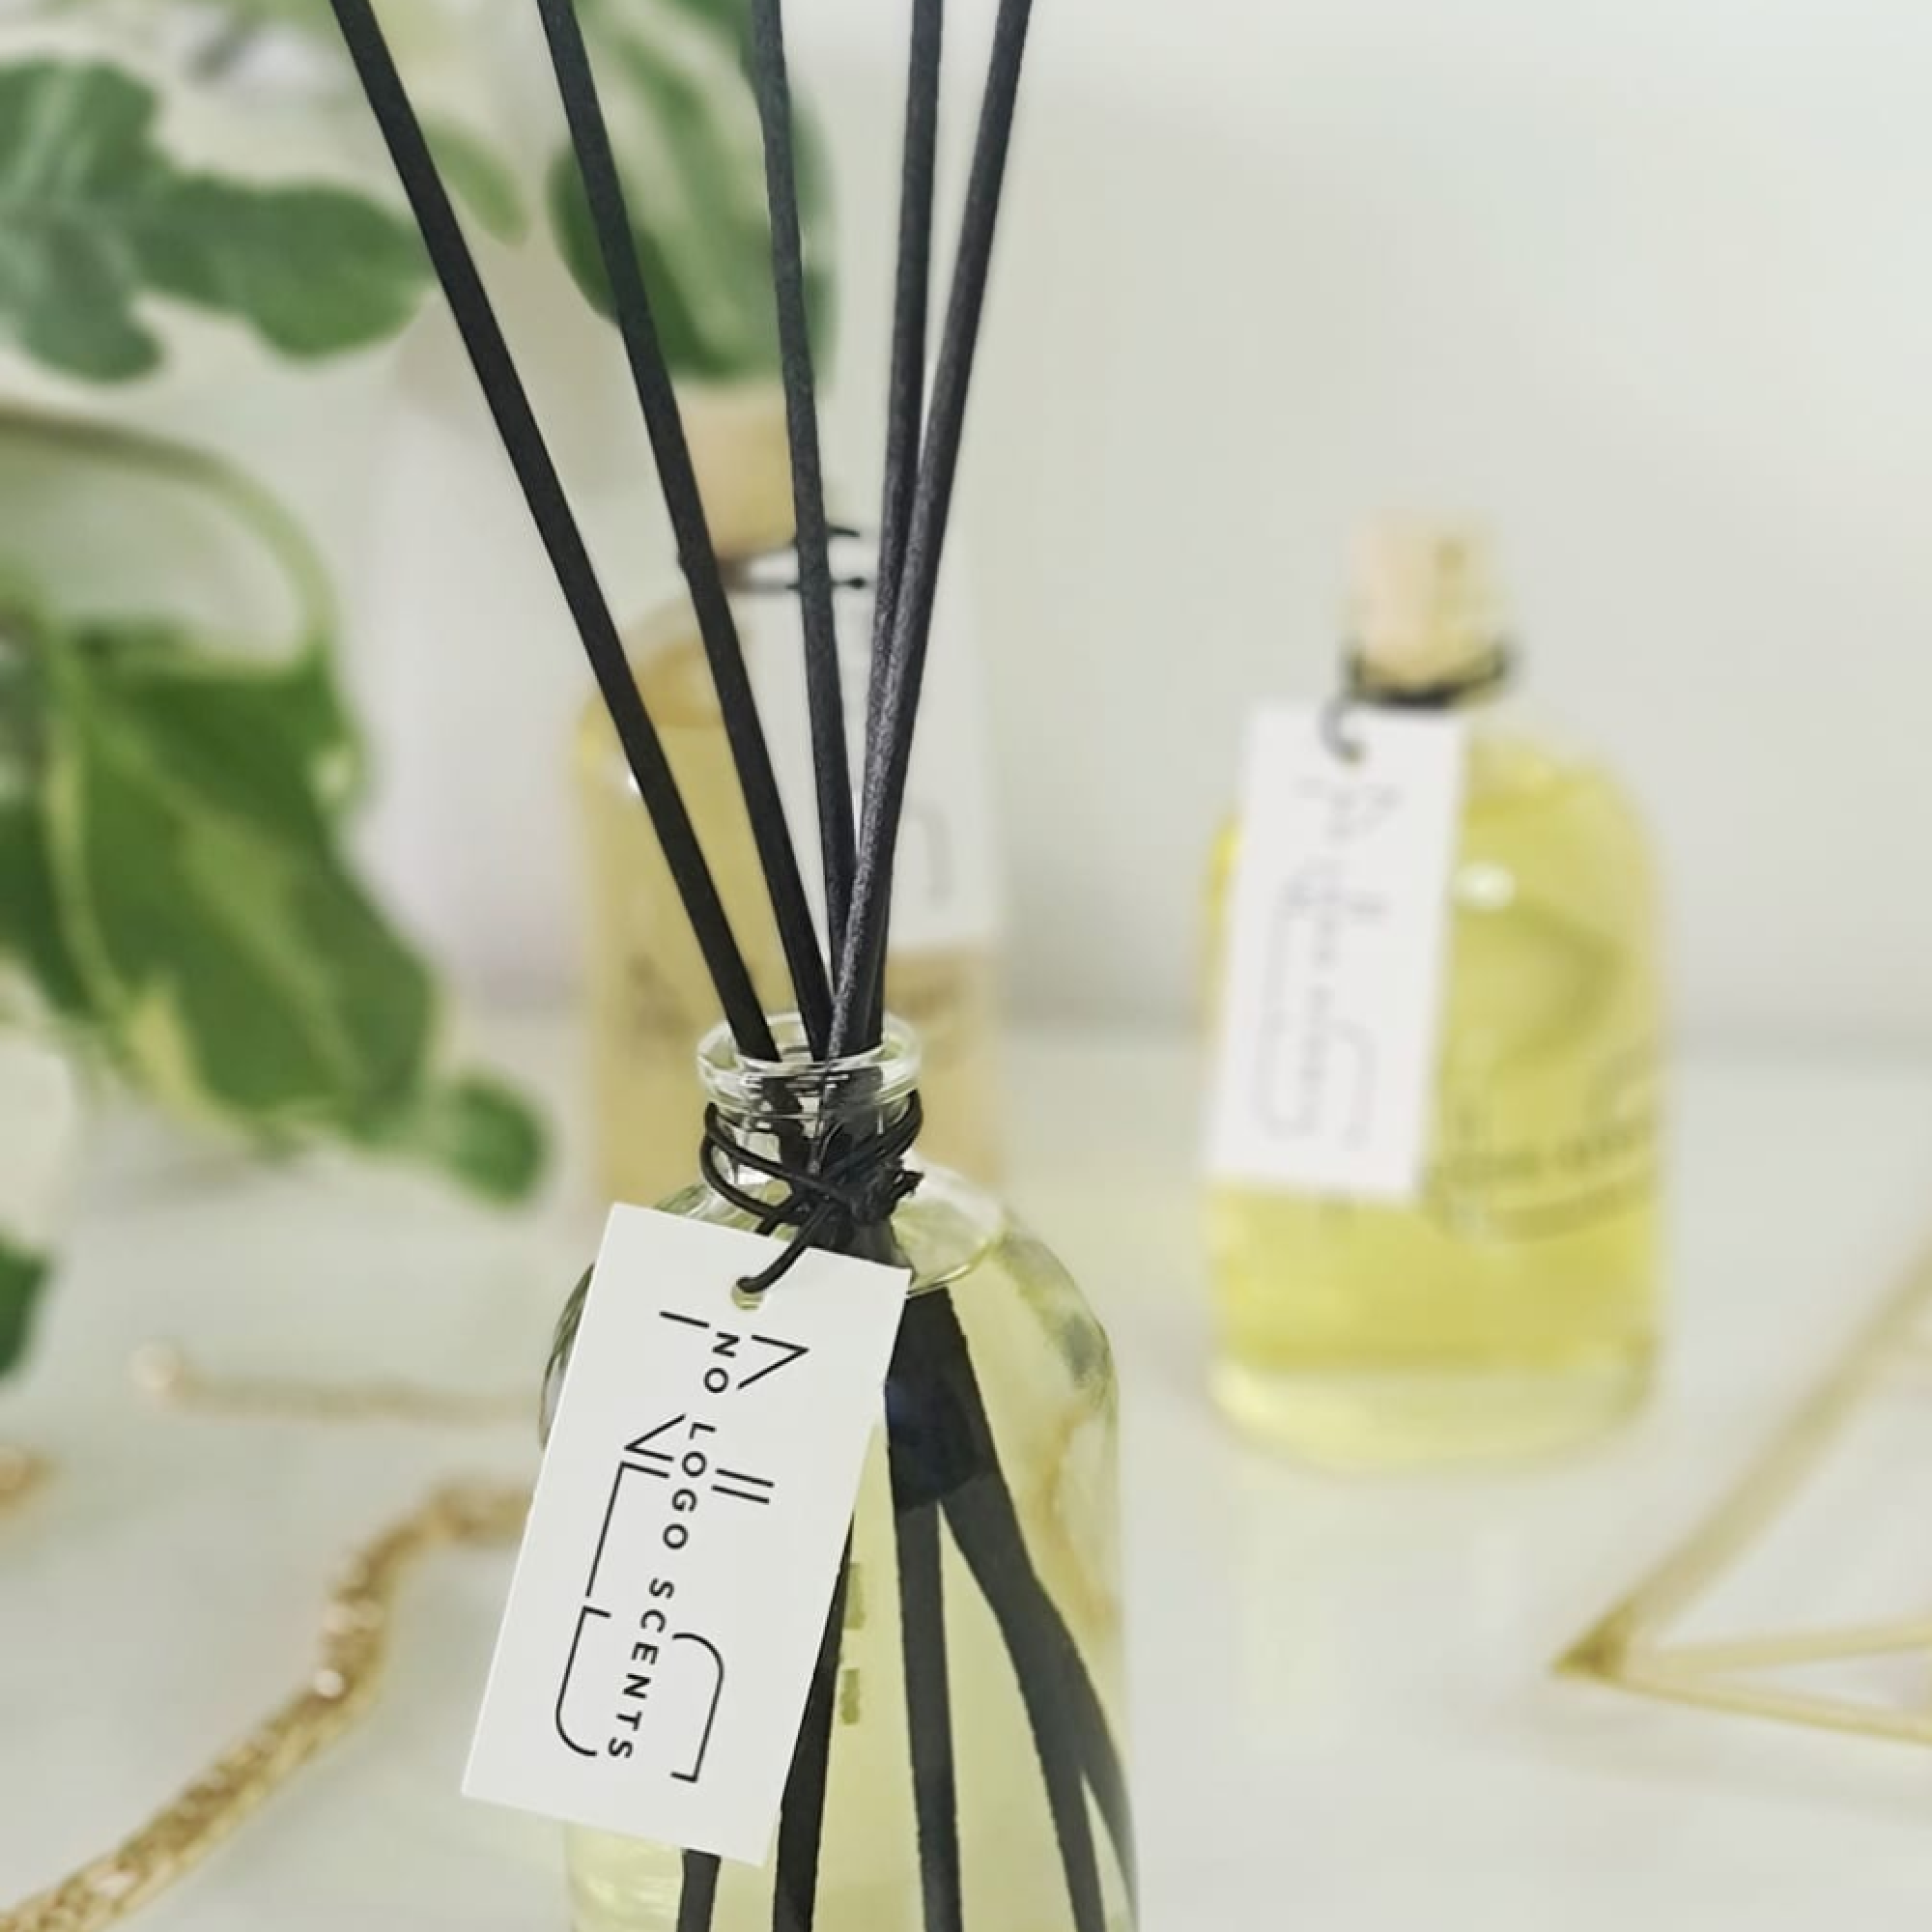 Highly Scented Reed Diffuser from category HOME & CAR - 1